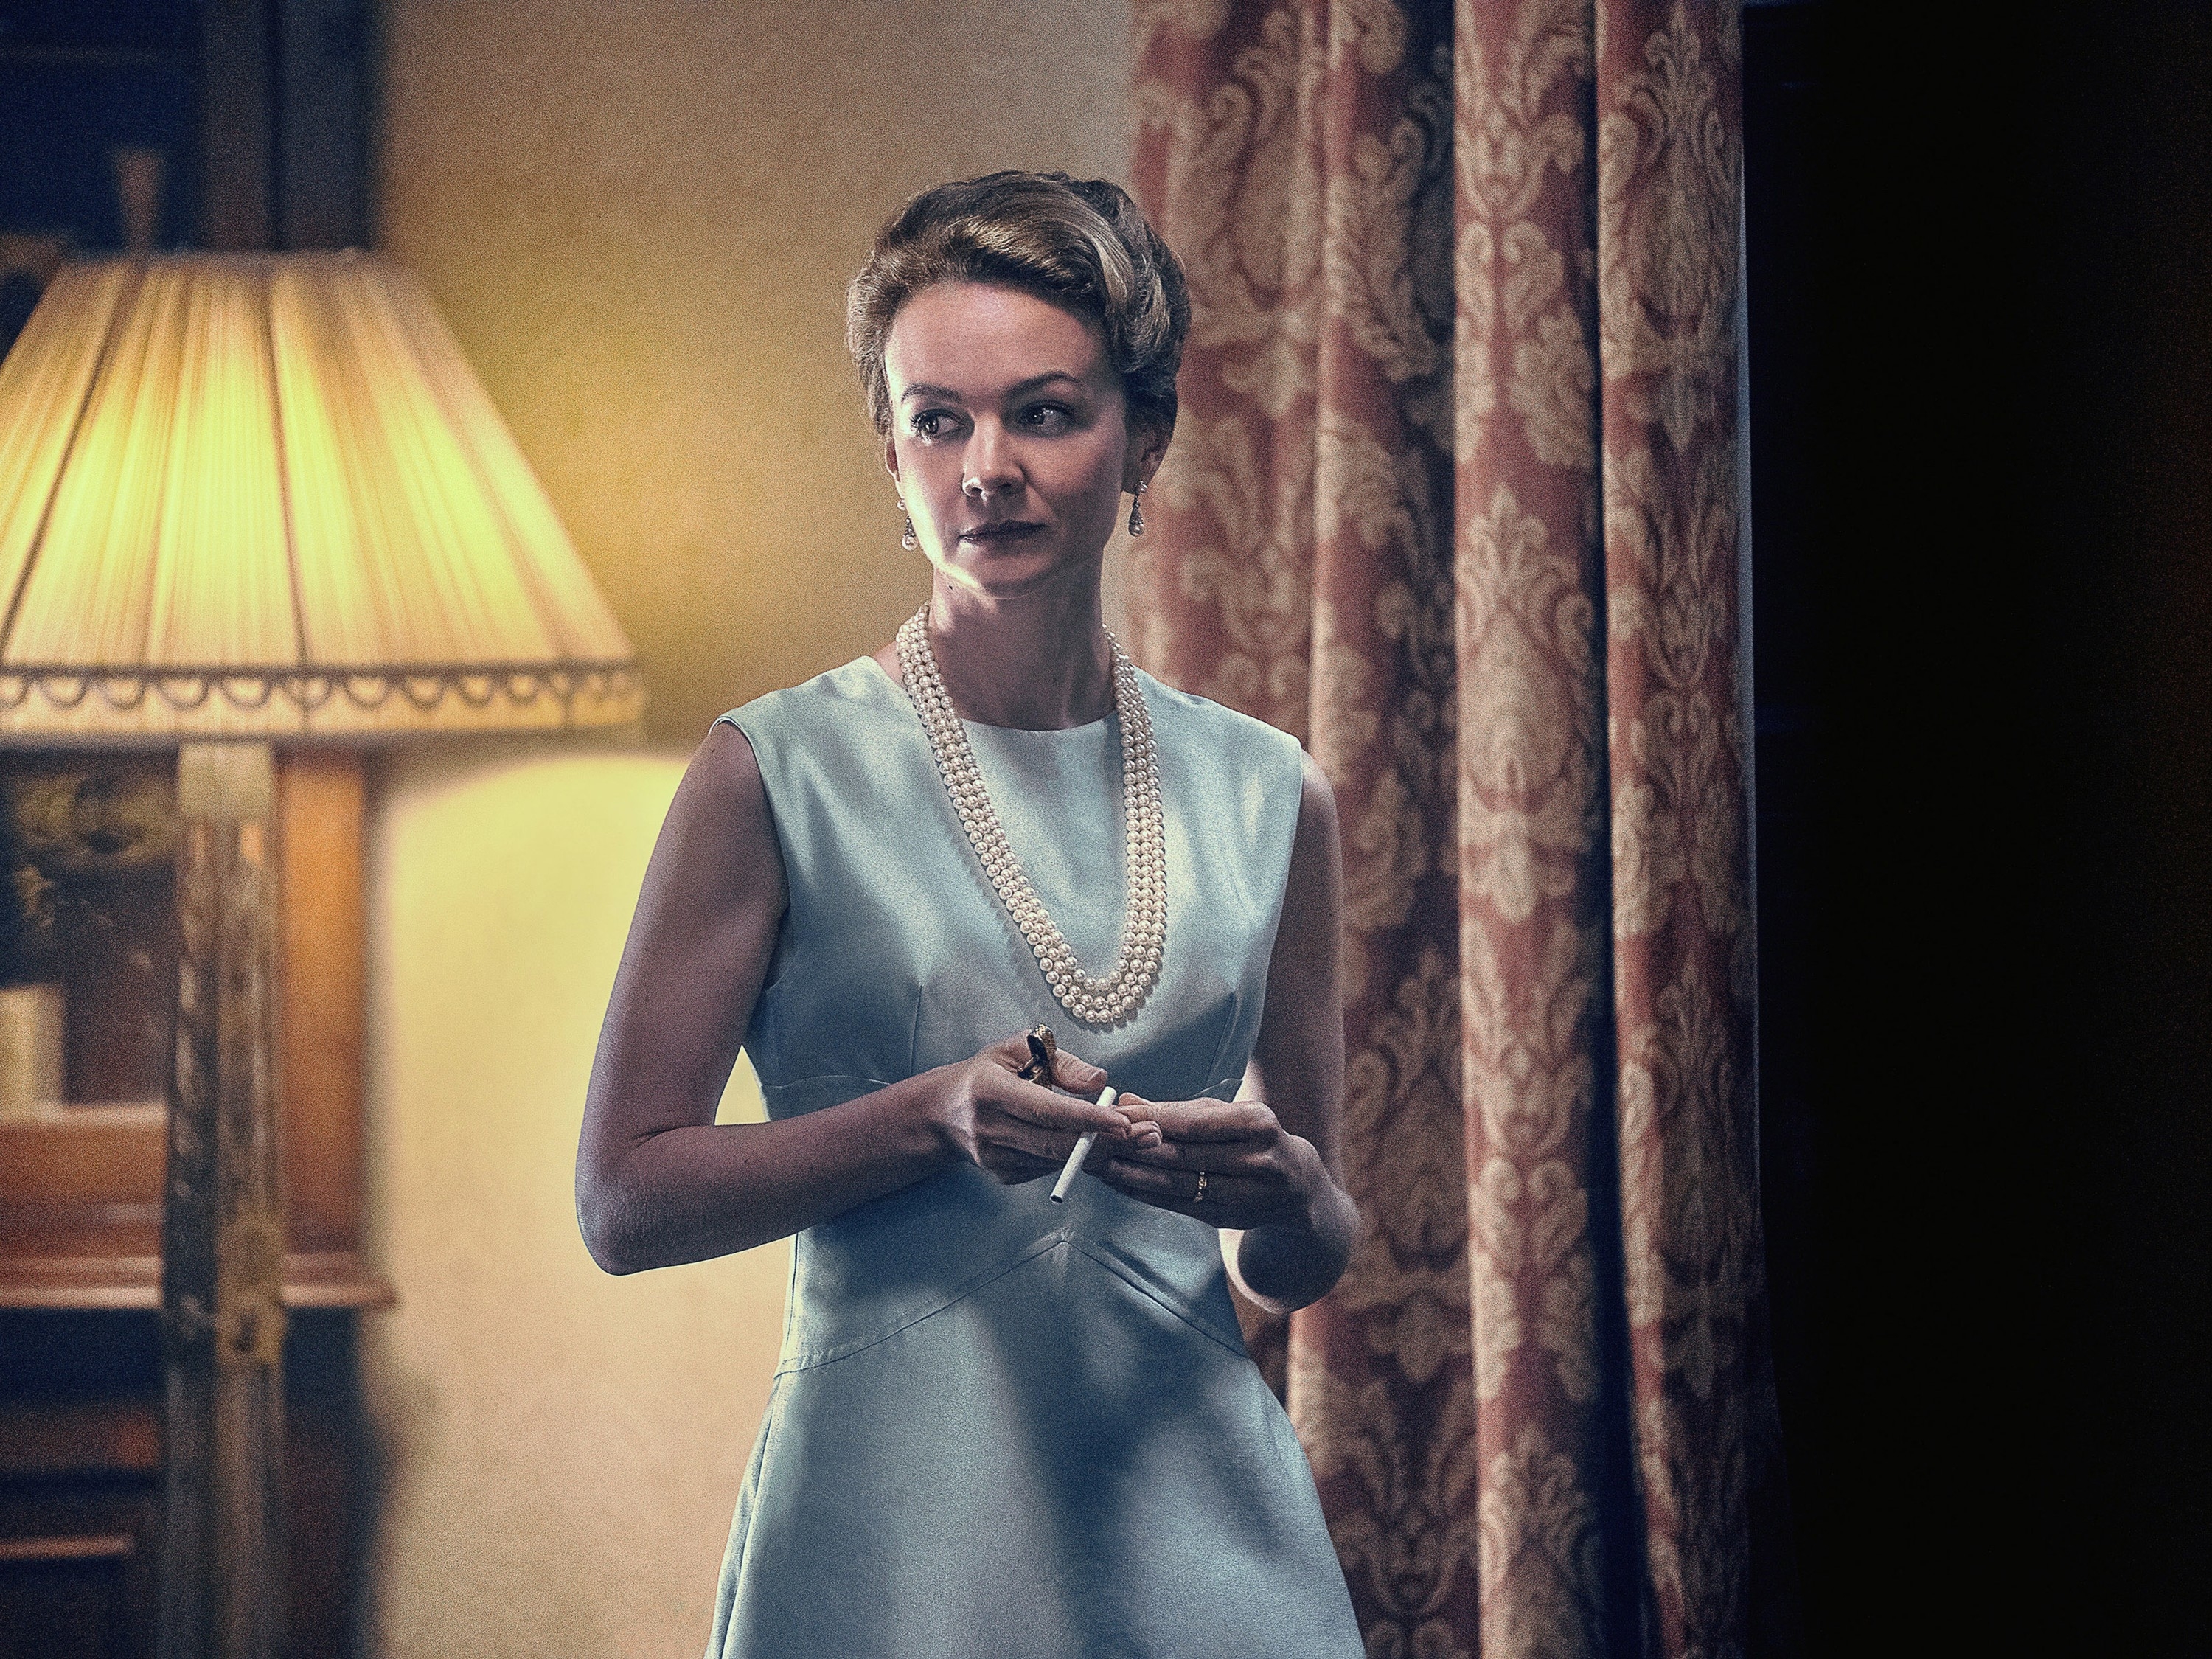 Close-up of Carey in a sleeveless dress and pearls, holding a cigarette